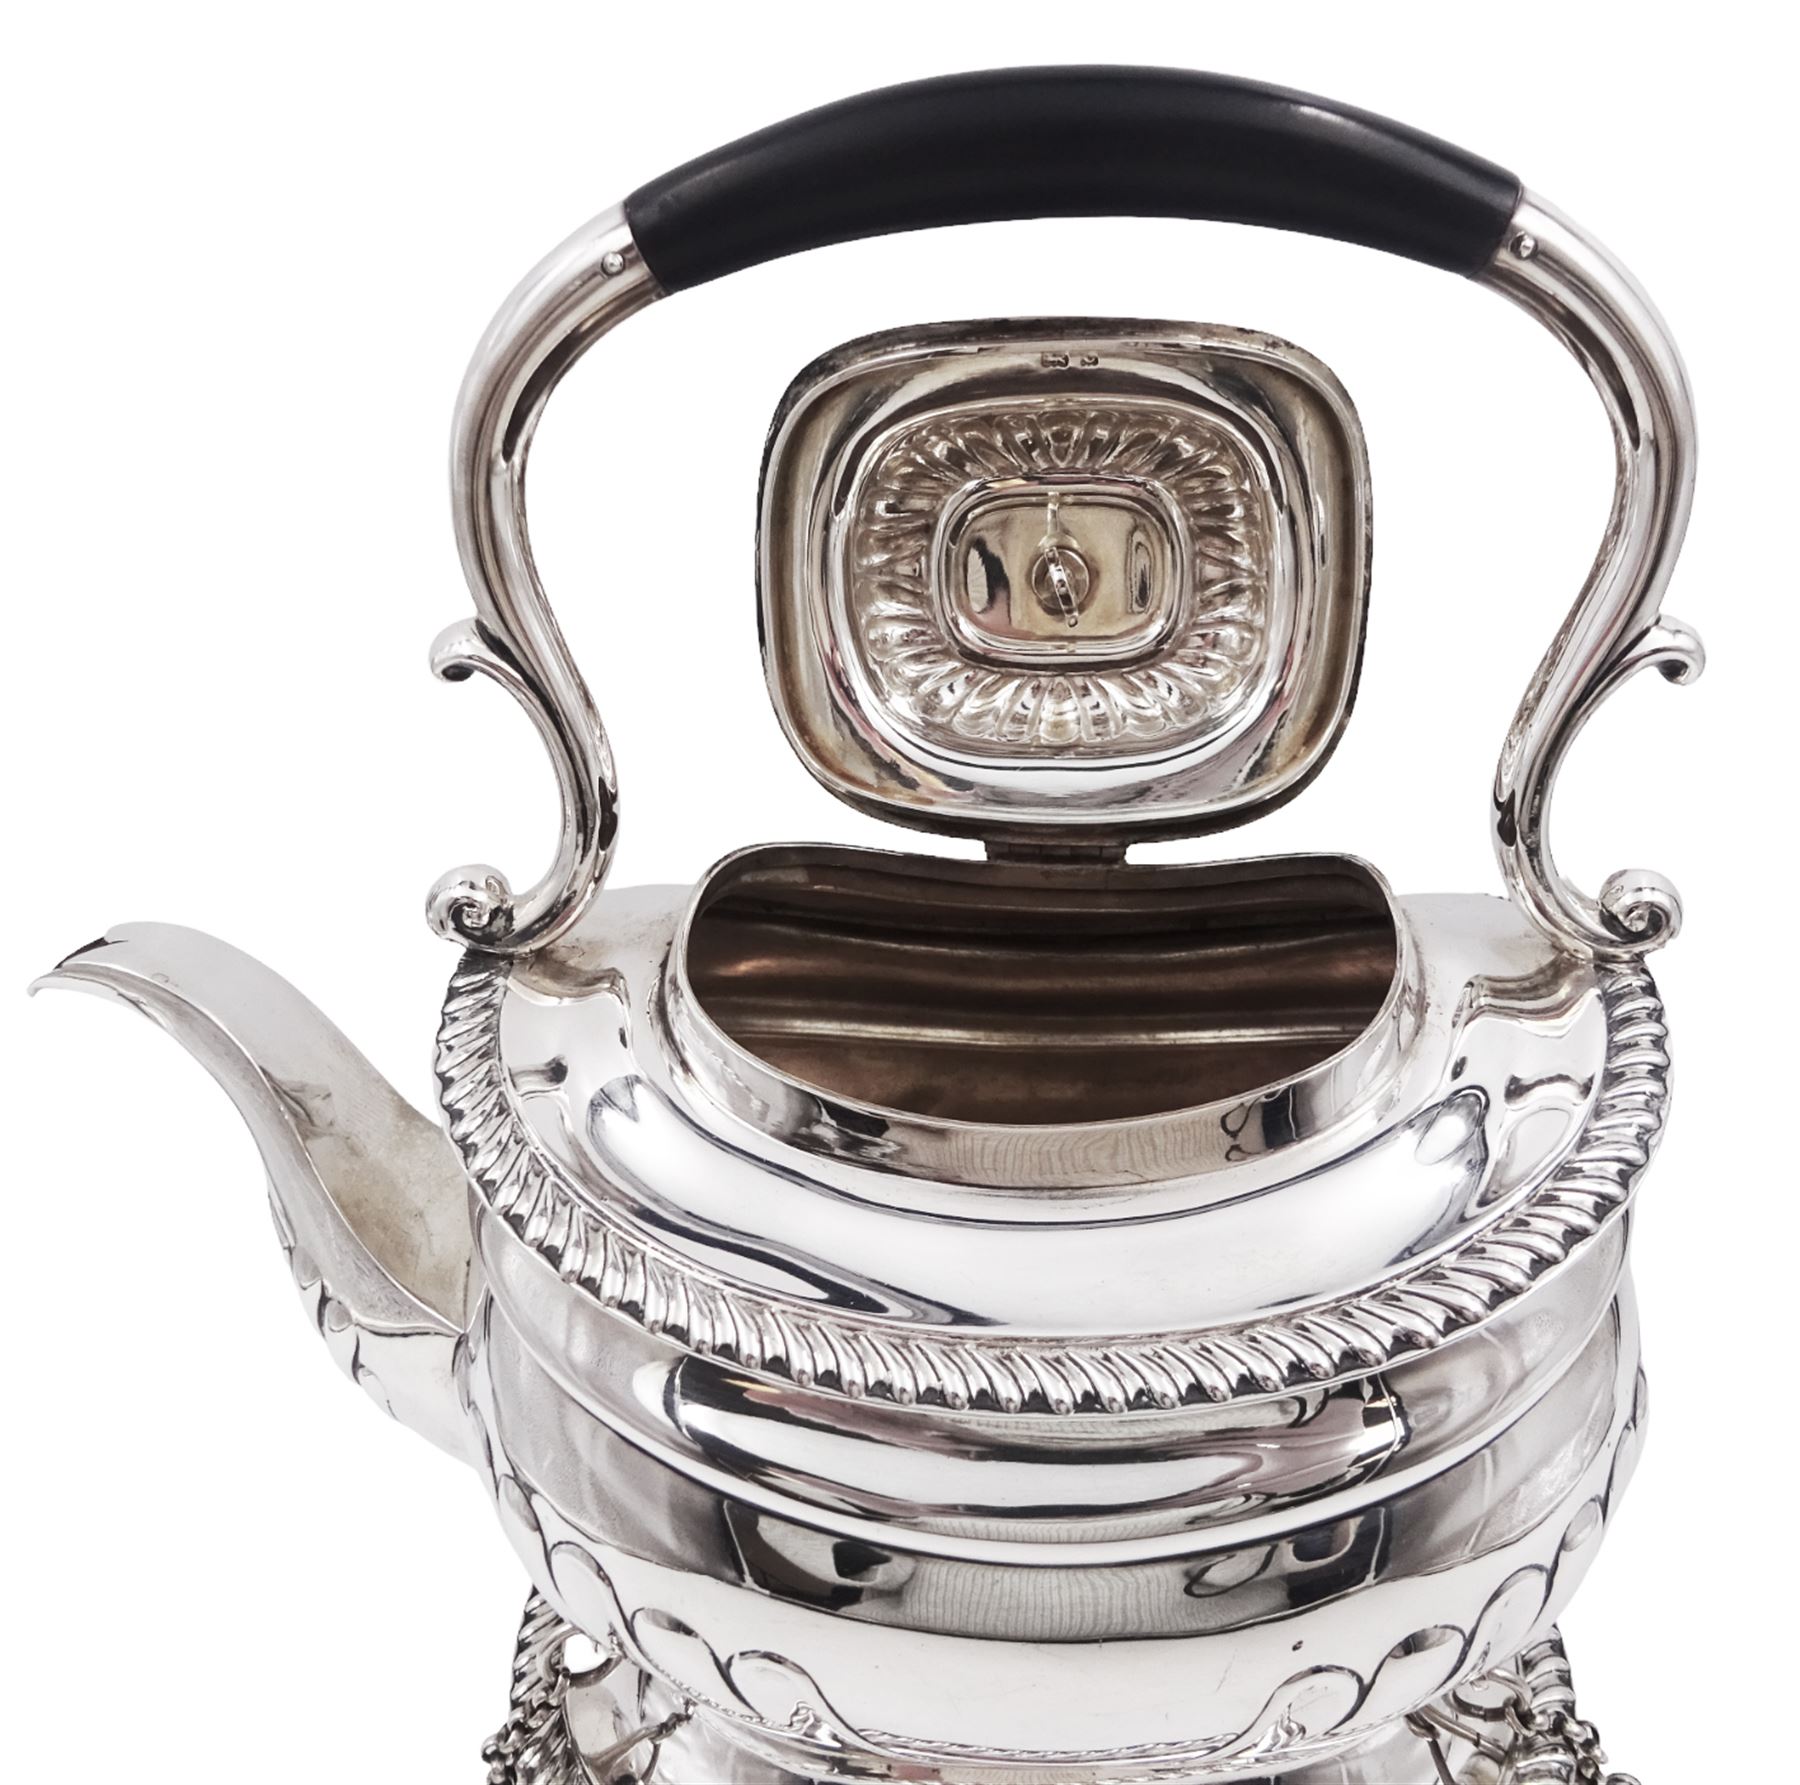 Edwardian silver spirit kettle on stand - Image 7 of 12